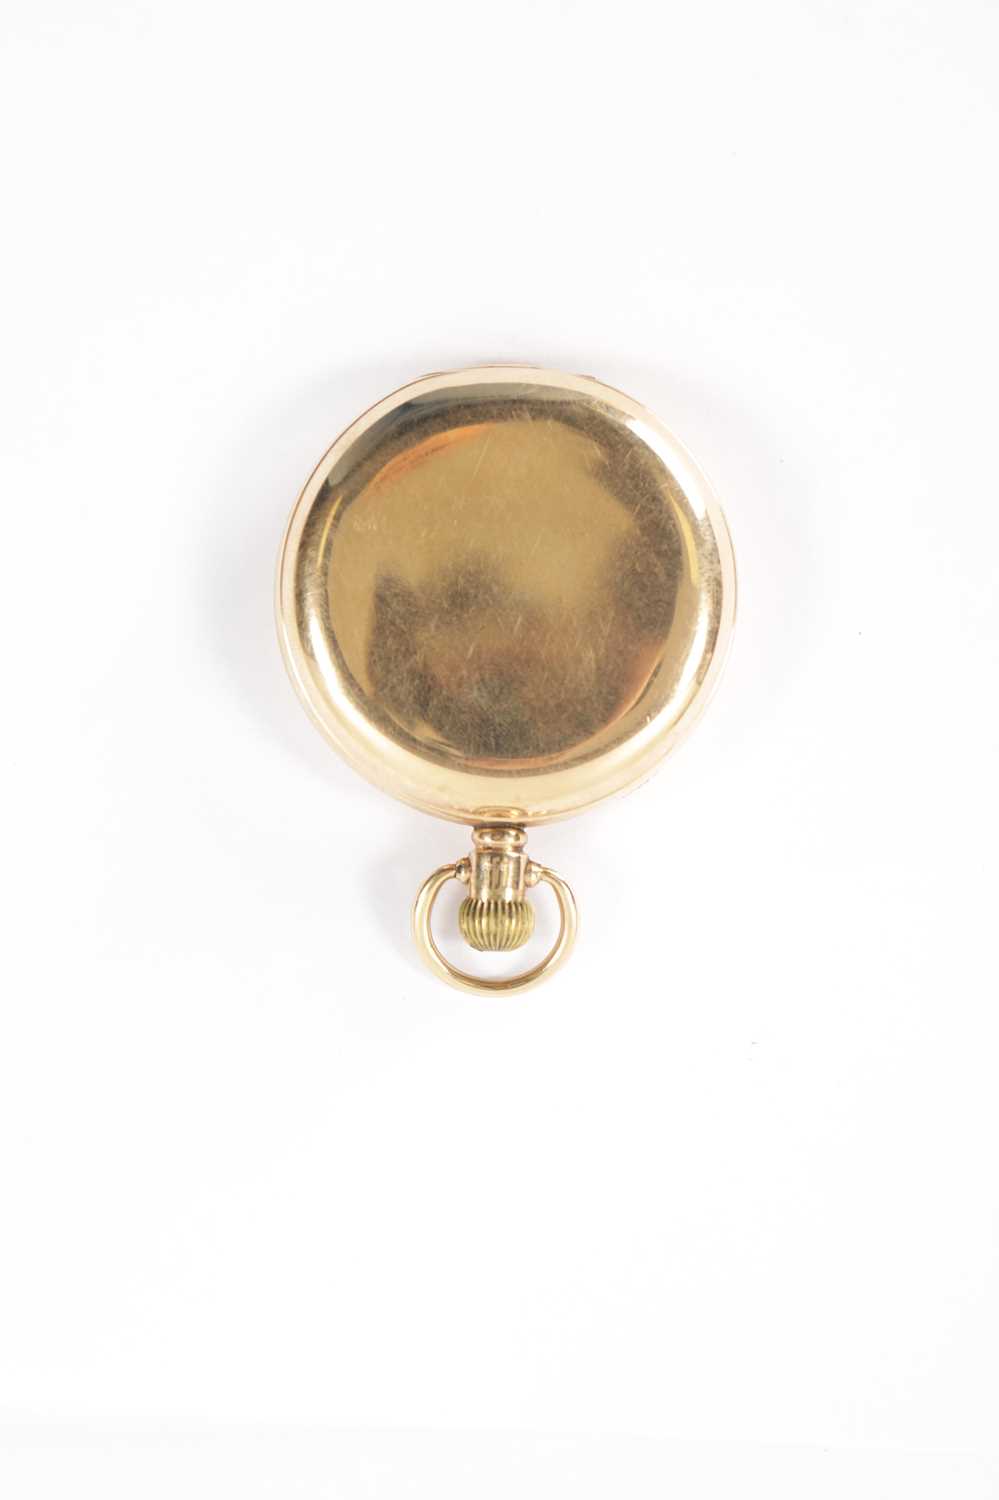 A 1920’S WALTHAM 9CT GOLD FULL HUNTER POCKET WATCH - Image 7 of 7